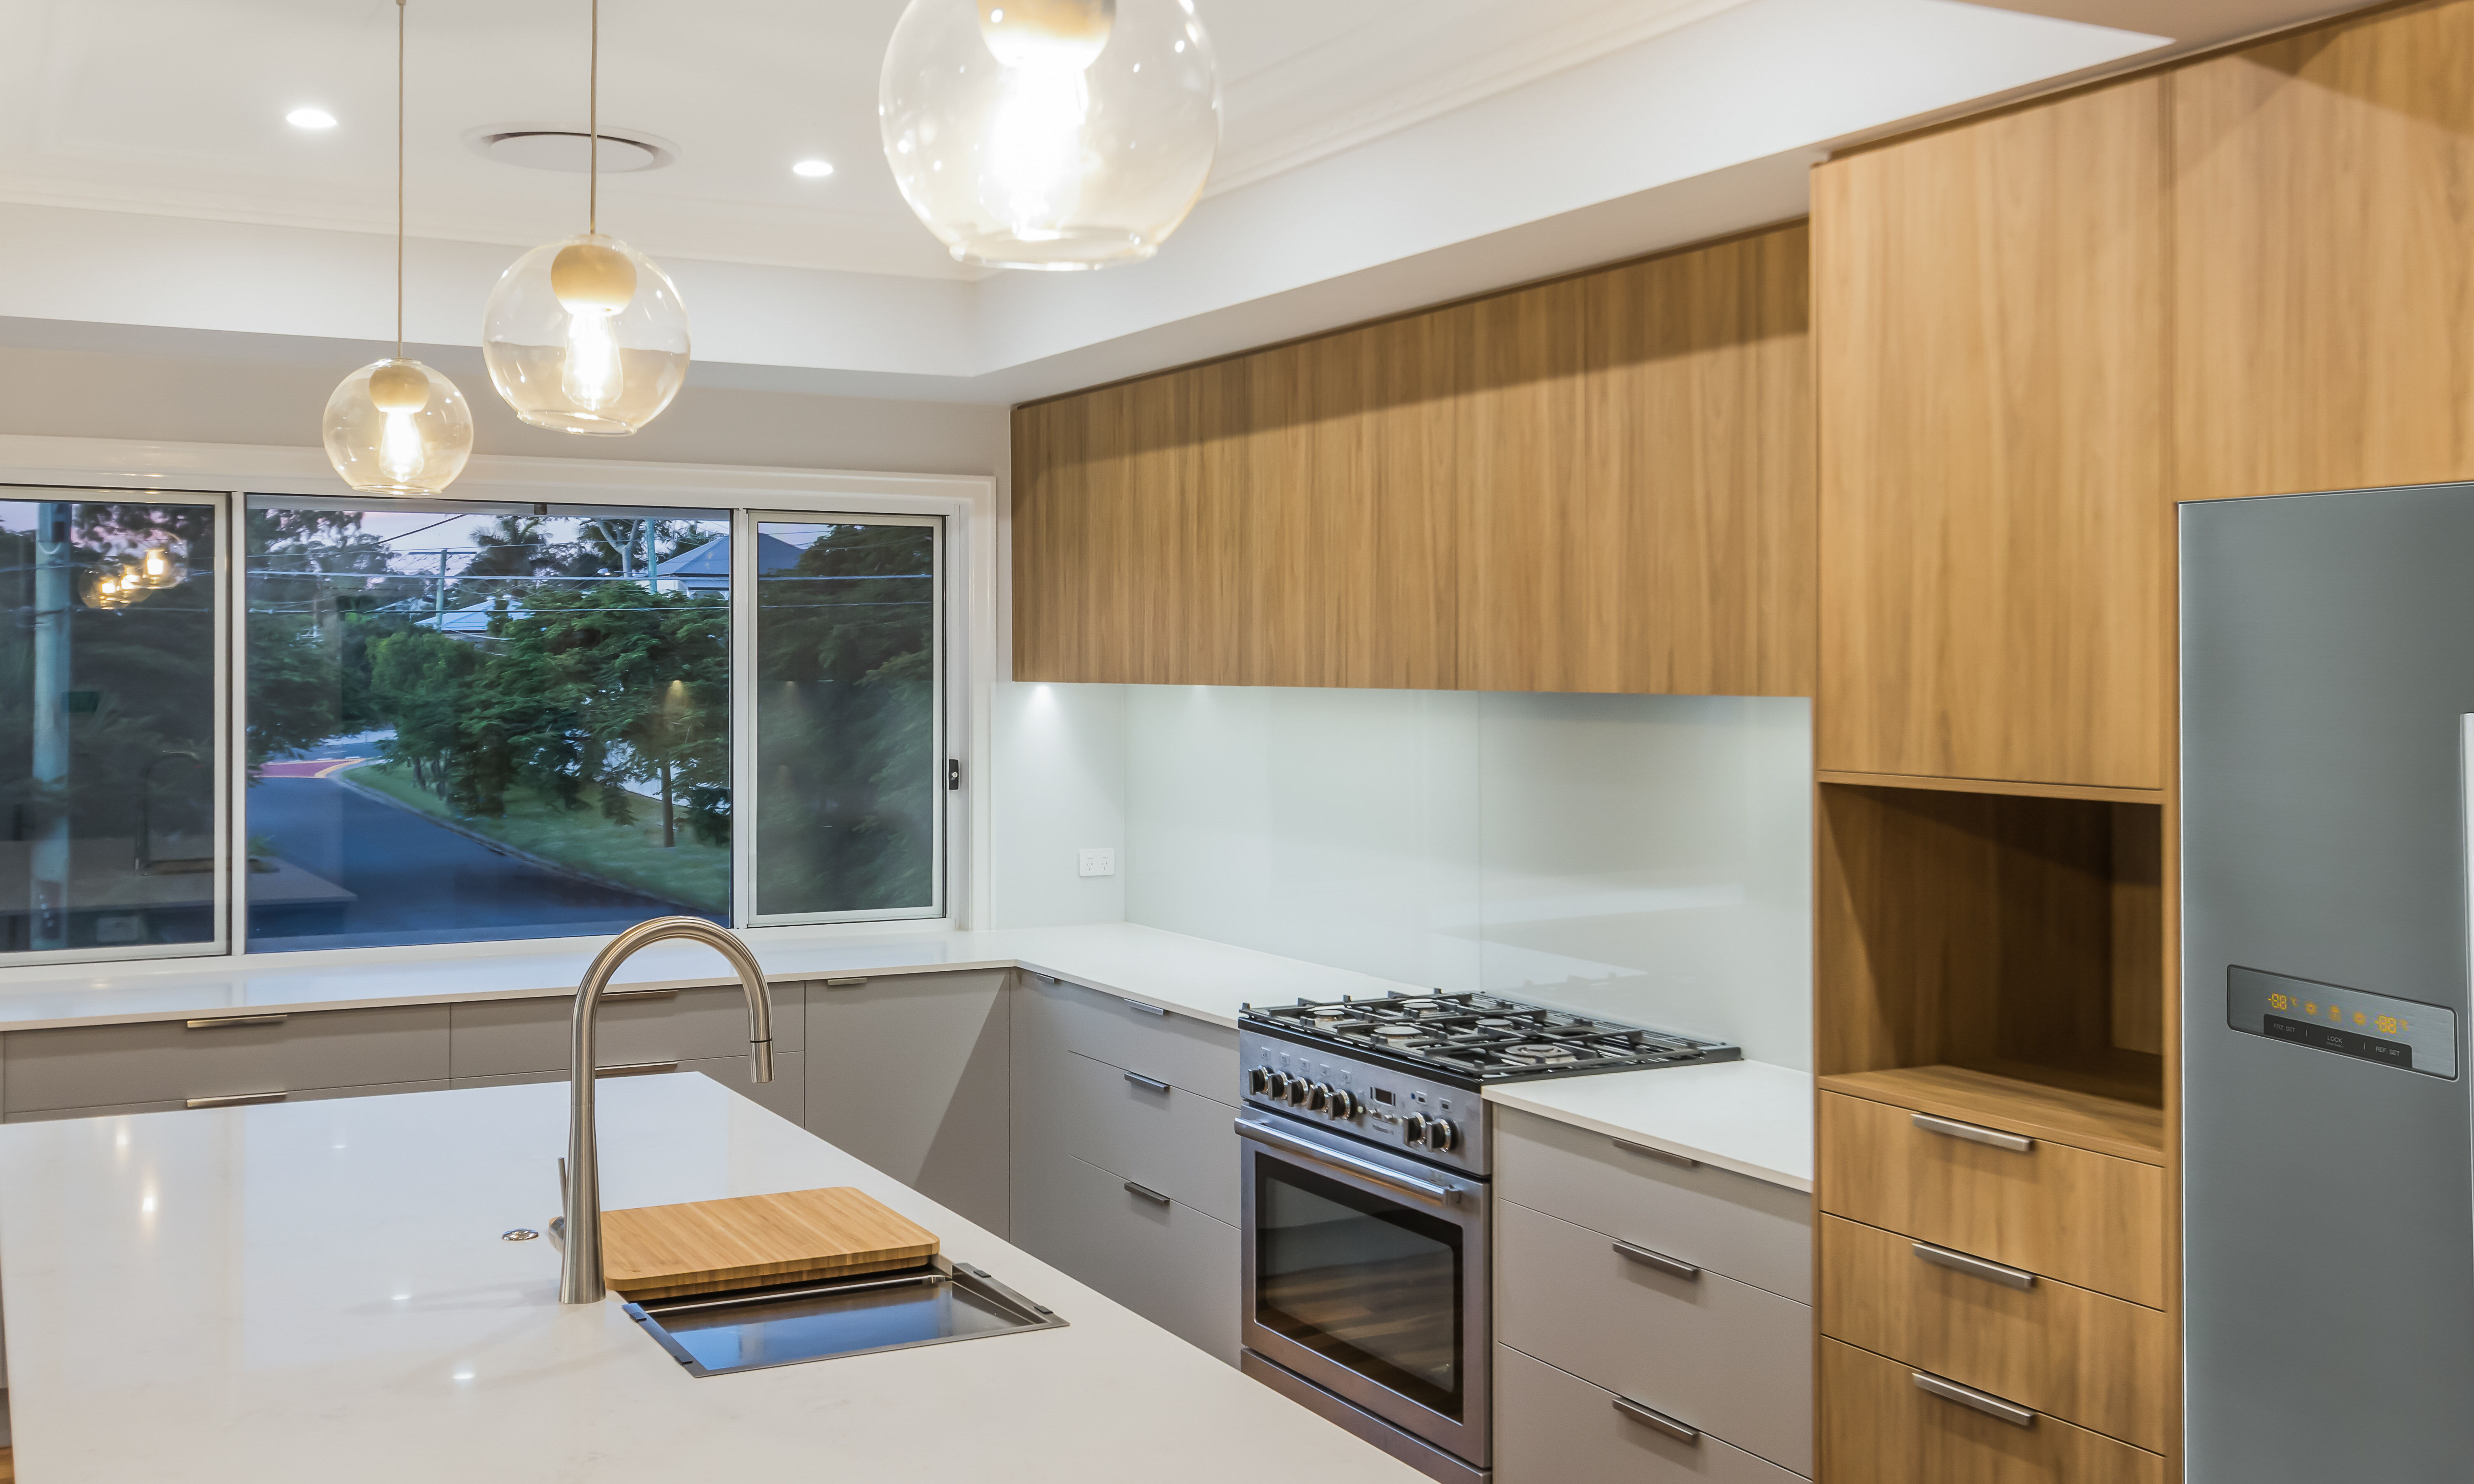 Norman Park Project 3 - Kitchen and Lighting